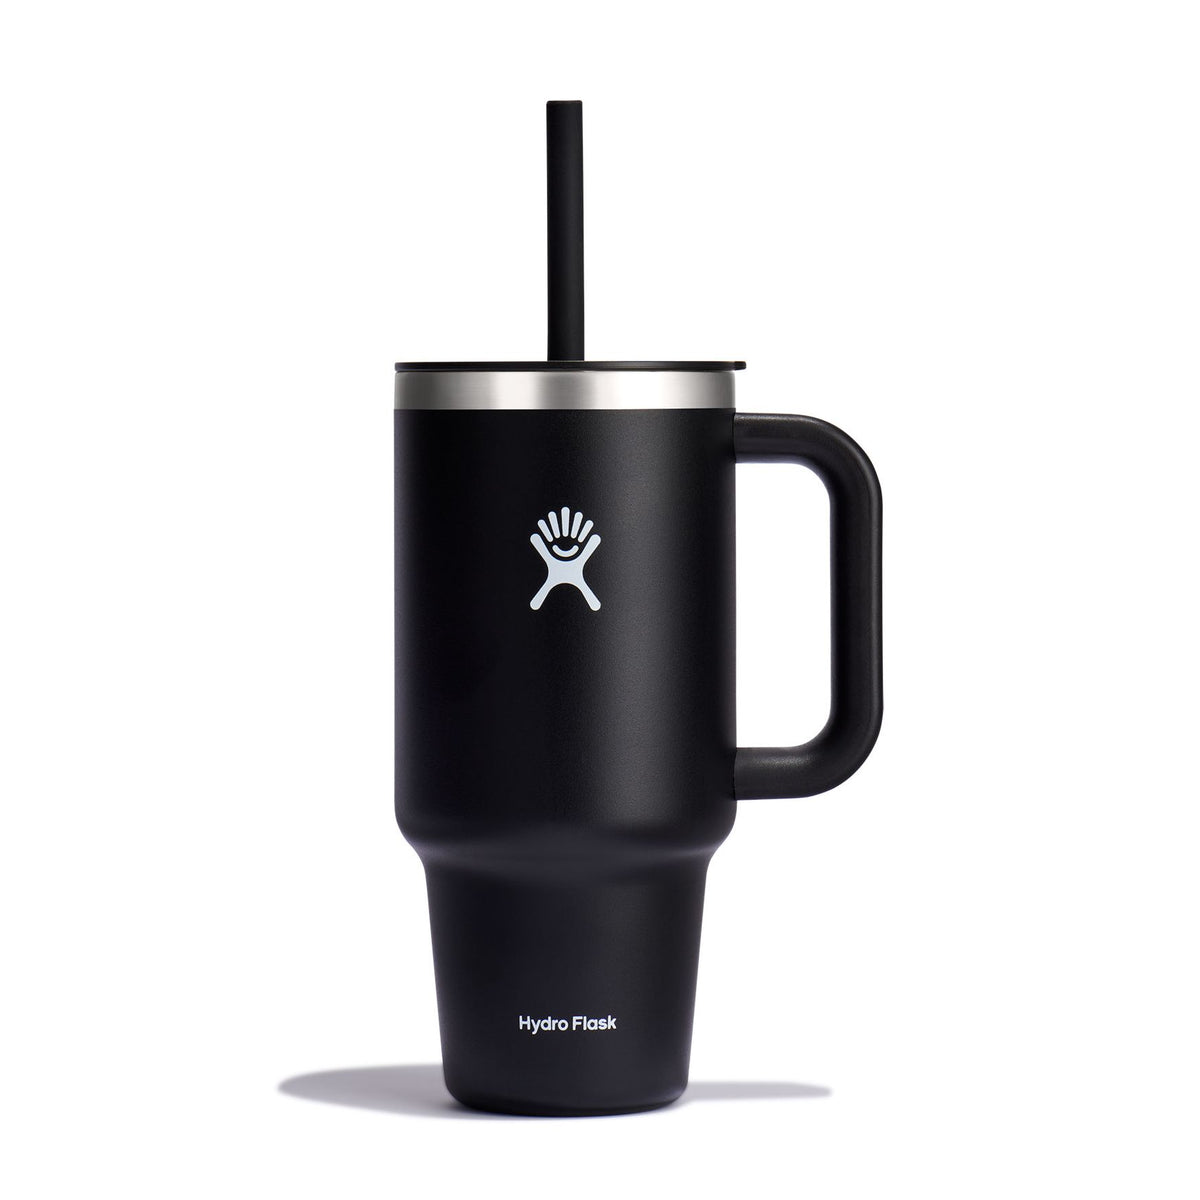 Hydro Flask Travel Tumbler 32 Oz. - Black – All About Tennis